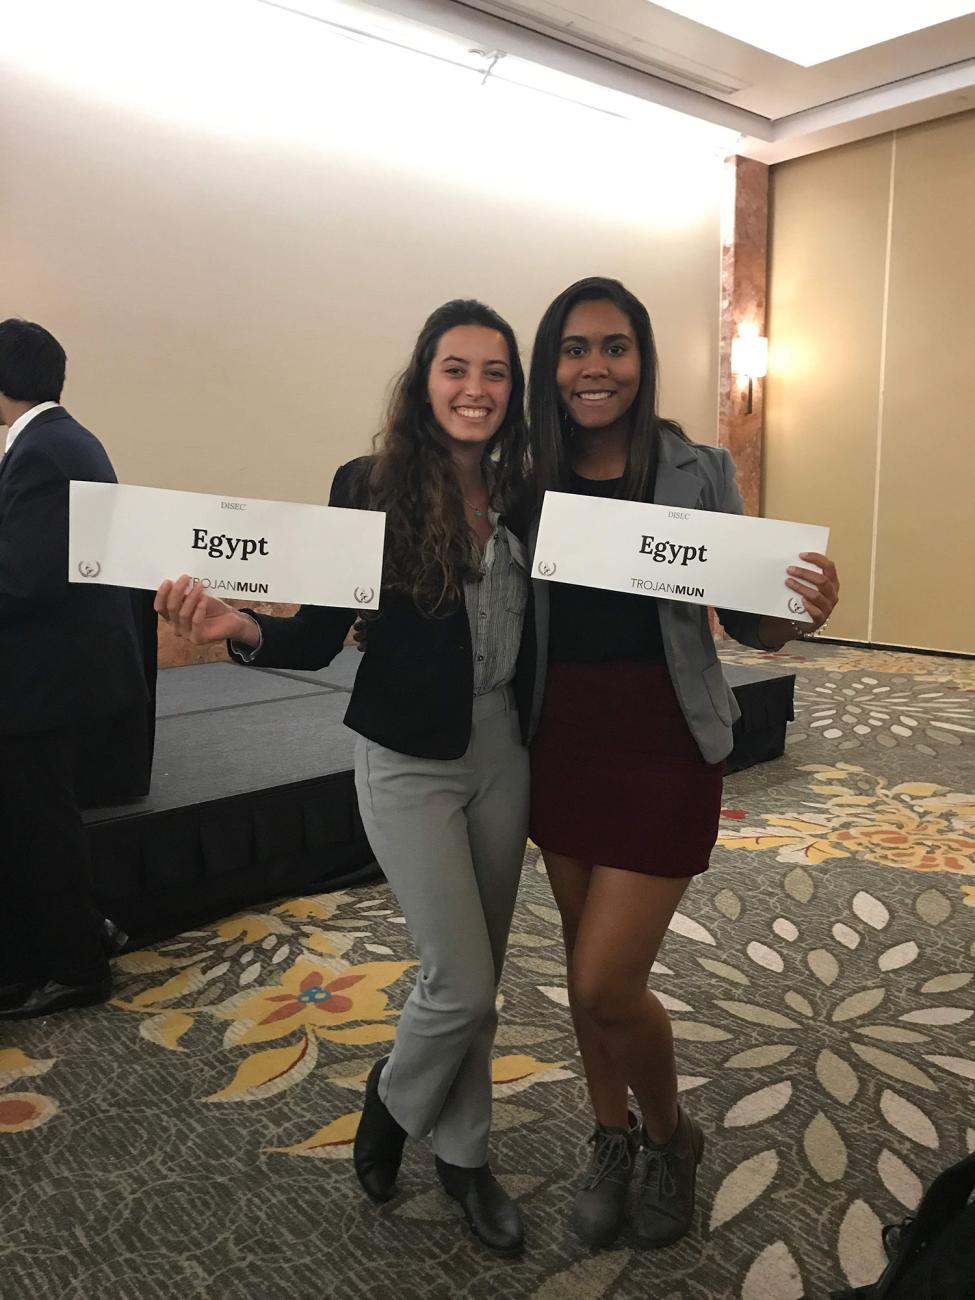 Model UN Pomona College: two students holding Egypt signs